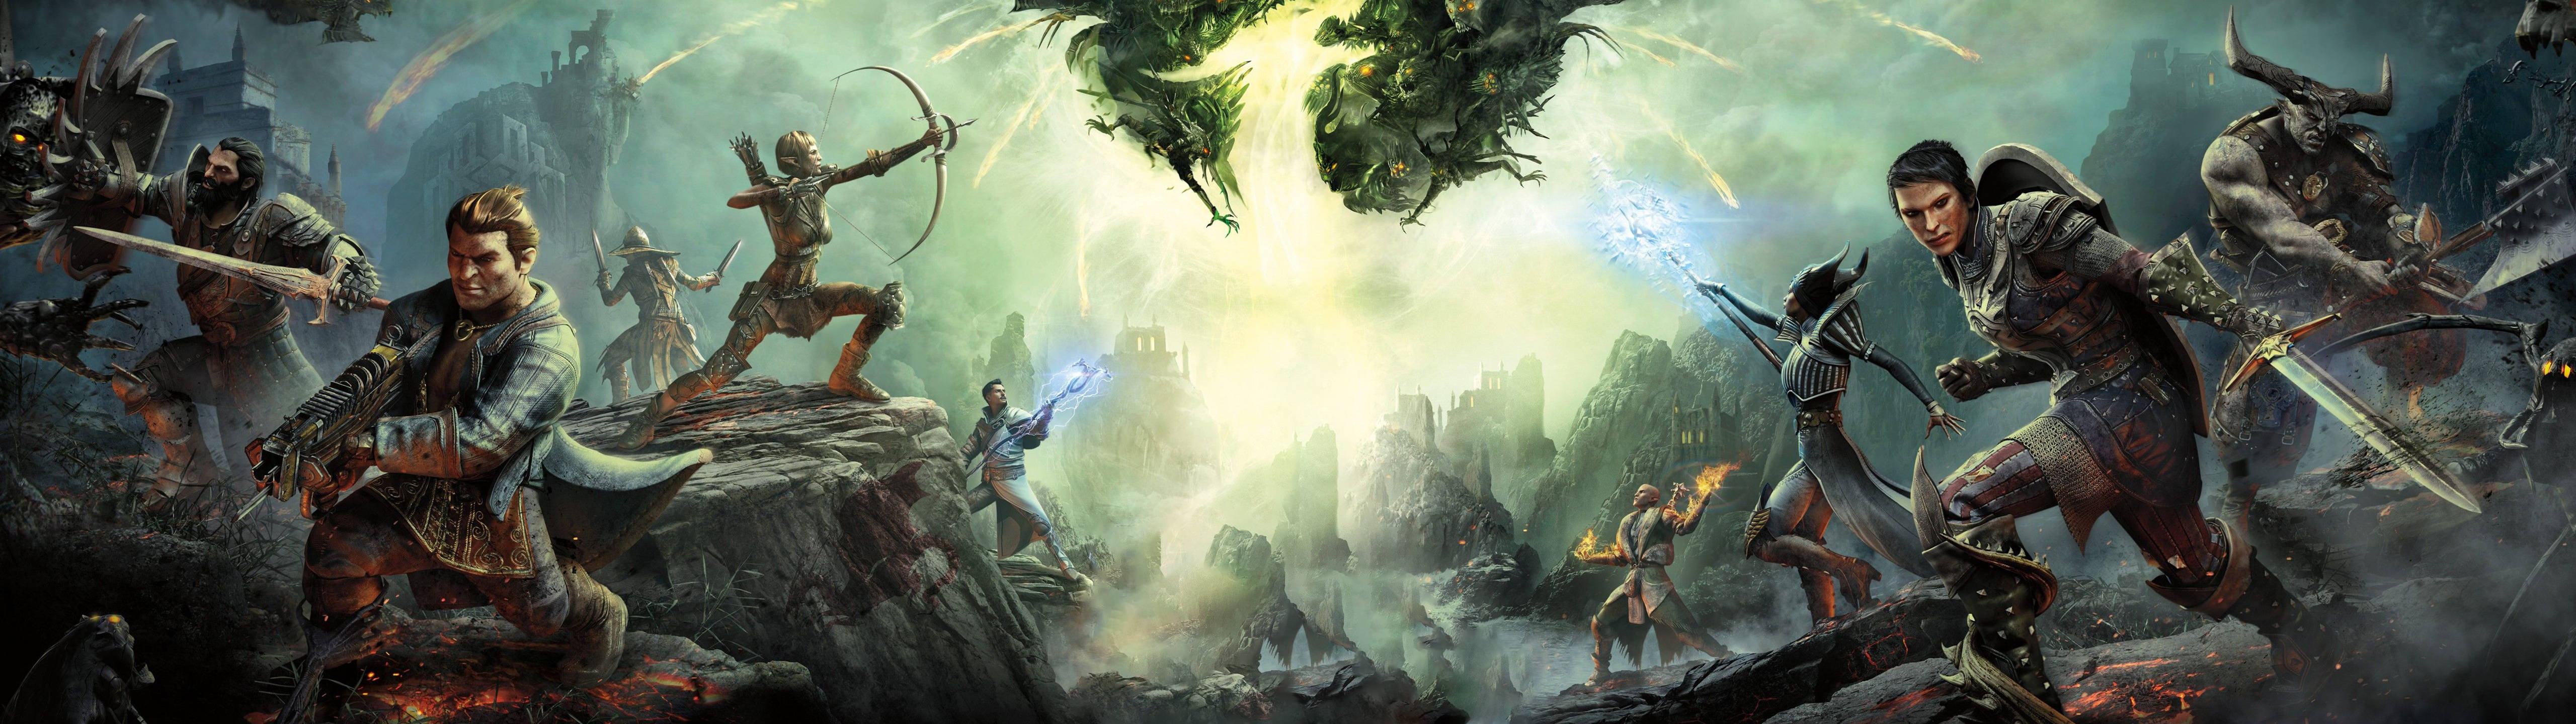 Download 5120x1440 Game Dragon Age Inquisition Wallpaper